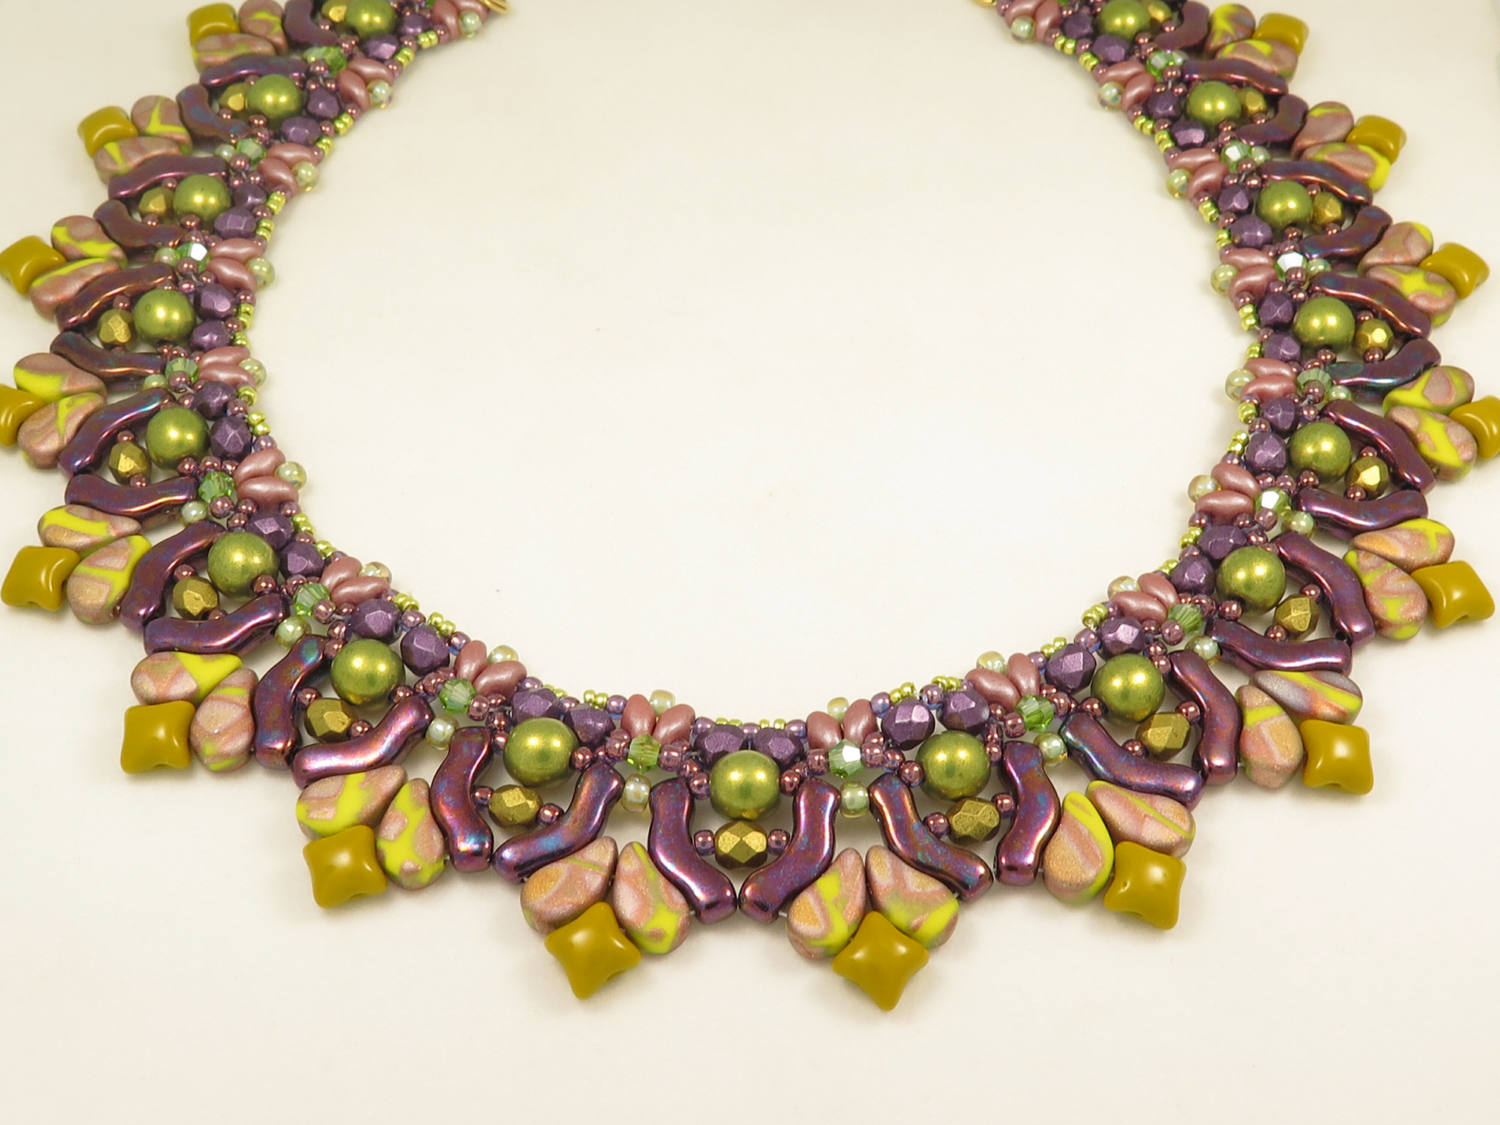 Arches Necklace - Beading Tutorial - PDF